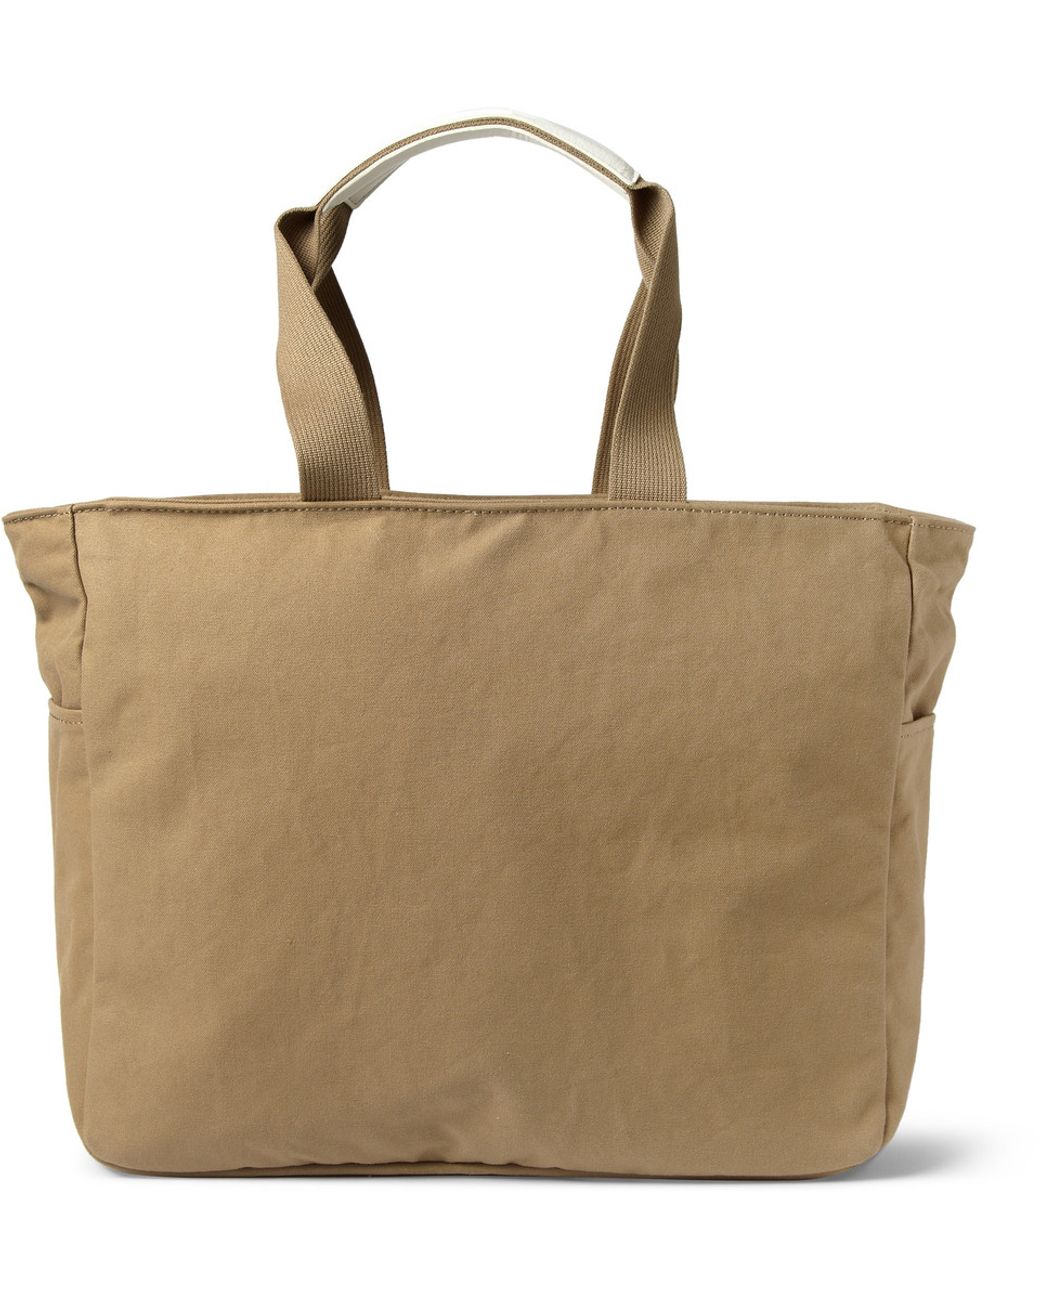 Porter-Yoshida and Co Beat Leather-Trimmed Cotton-Canvas Tote Bag in ...